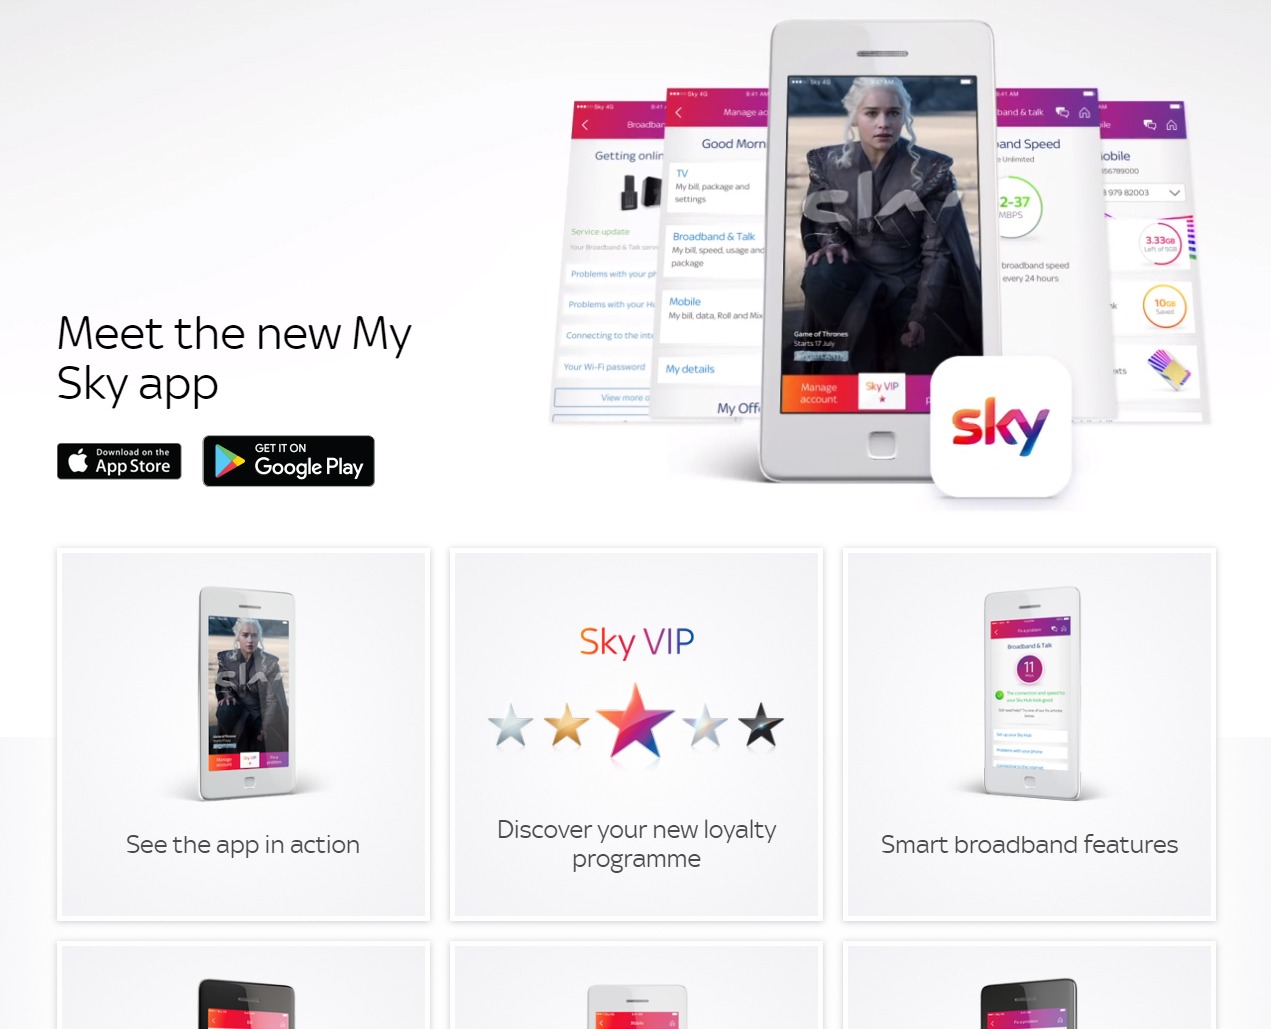 Sky has all the rights to use Game of Thrones to promote their My Sky app and loyalty program.